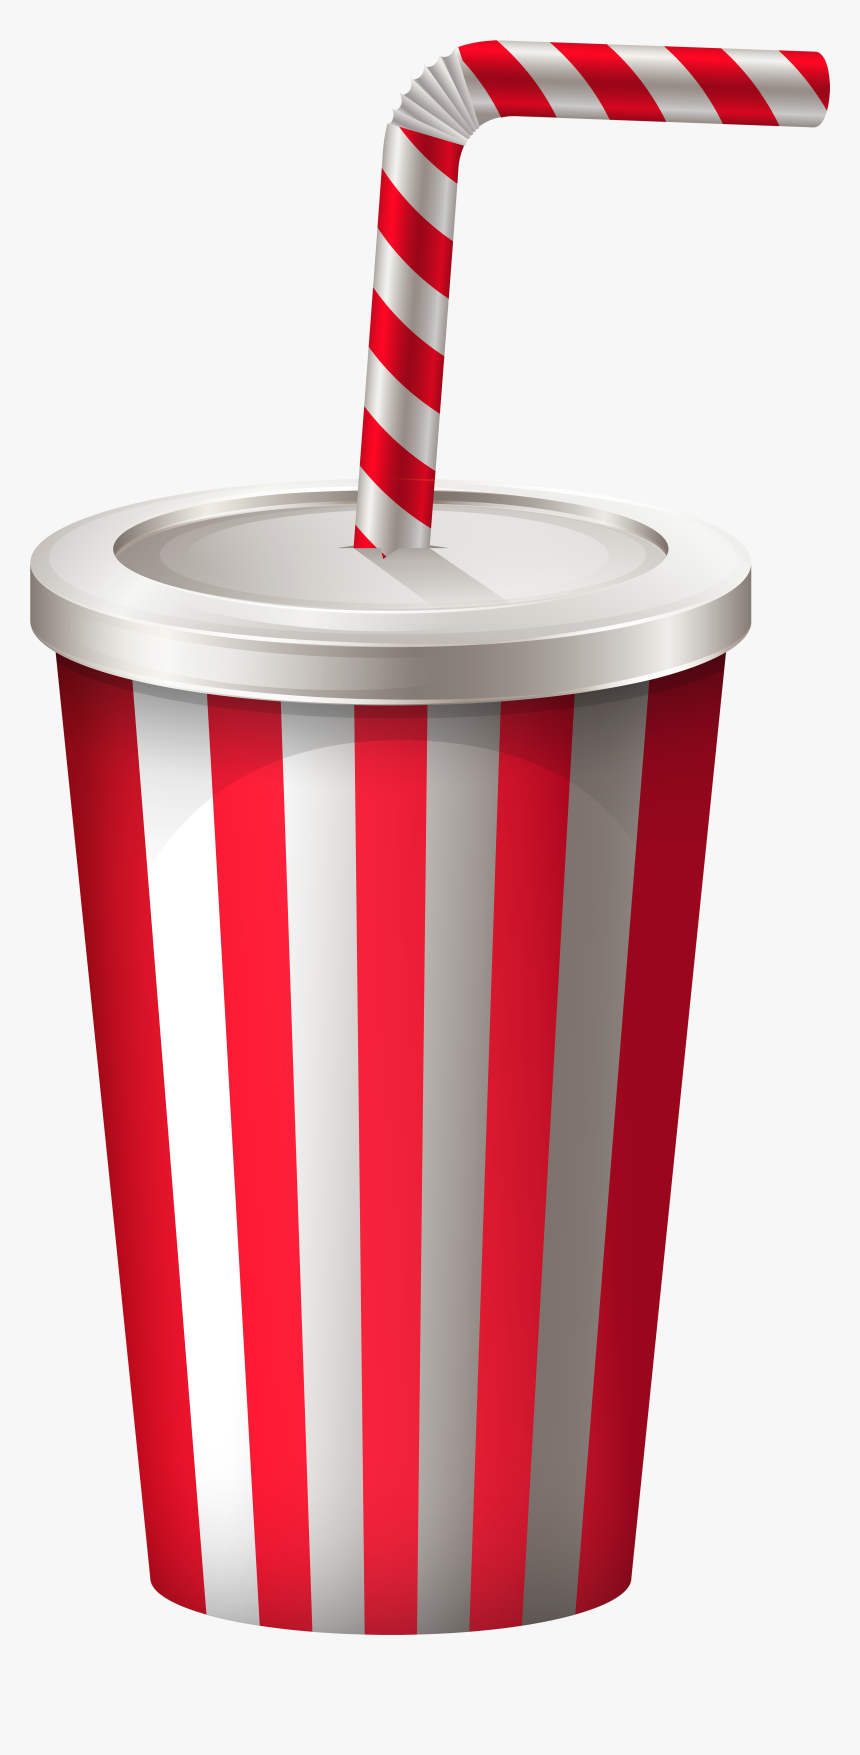 Drink Cup With Straw Png Transparent Clip Art Image, Png Download, Free Download